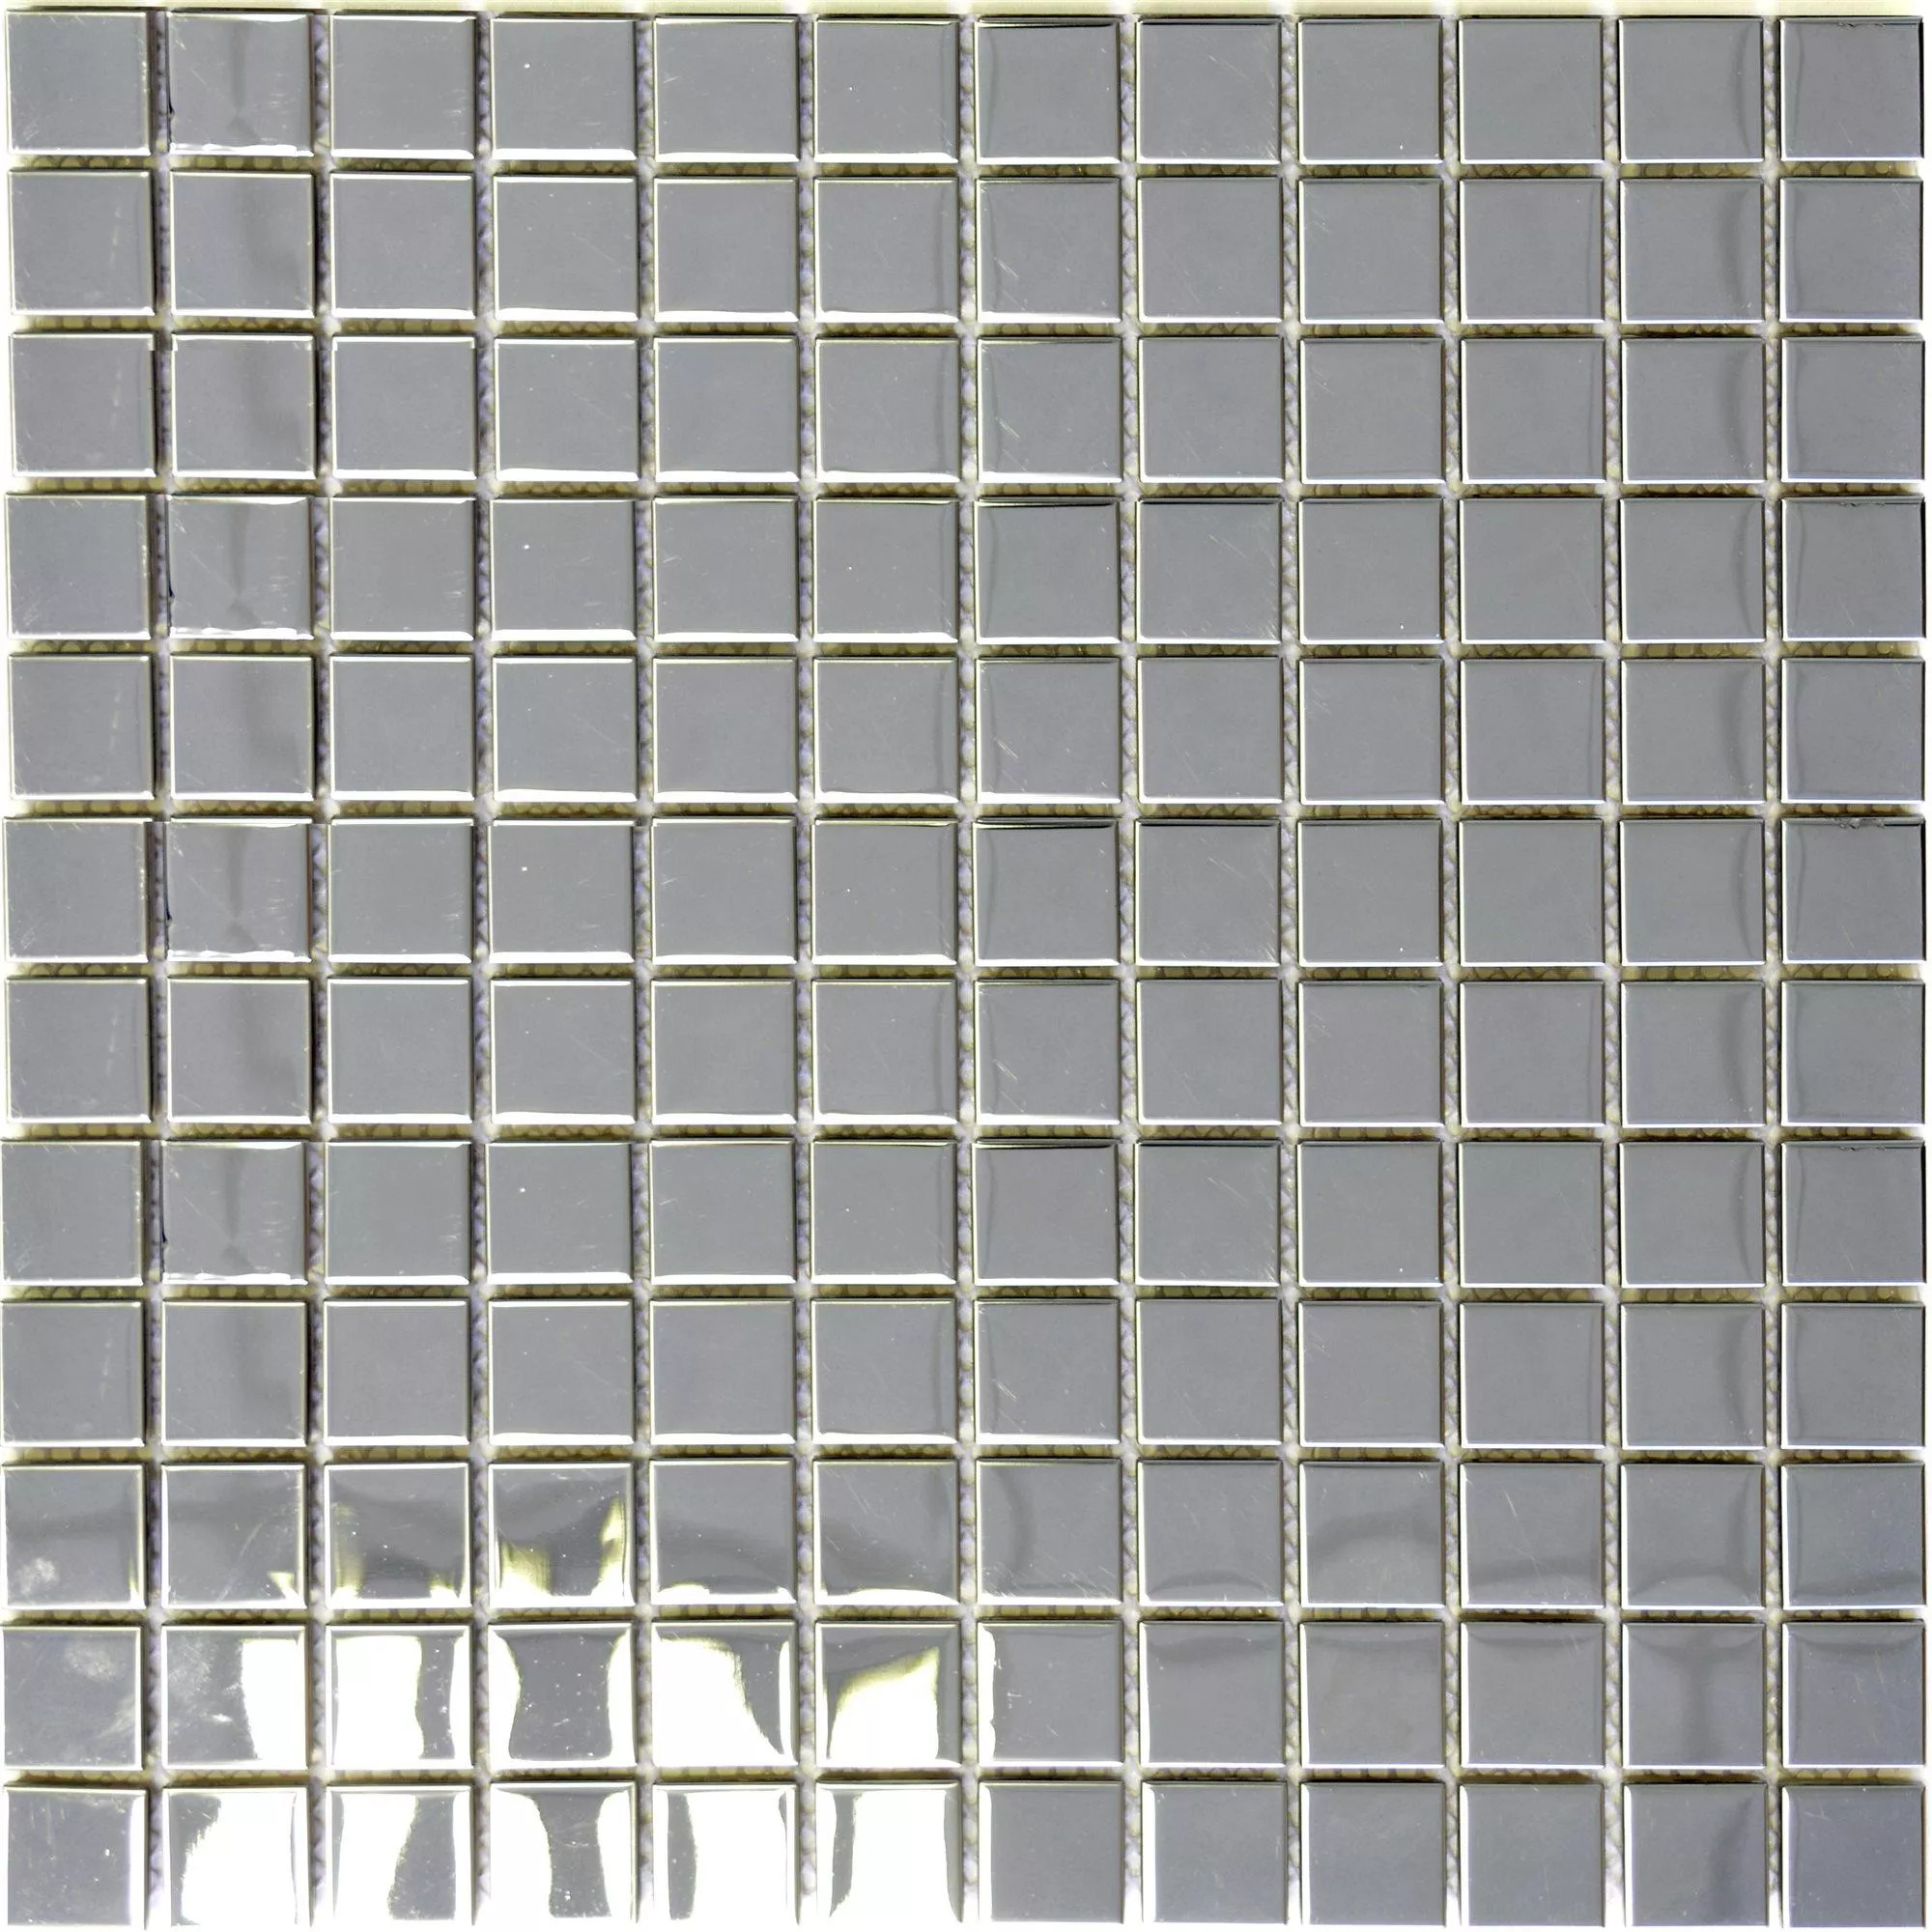 Stainless Steel Mosaic Tiles Magnet Glossy Square 23